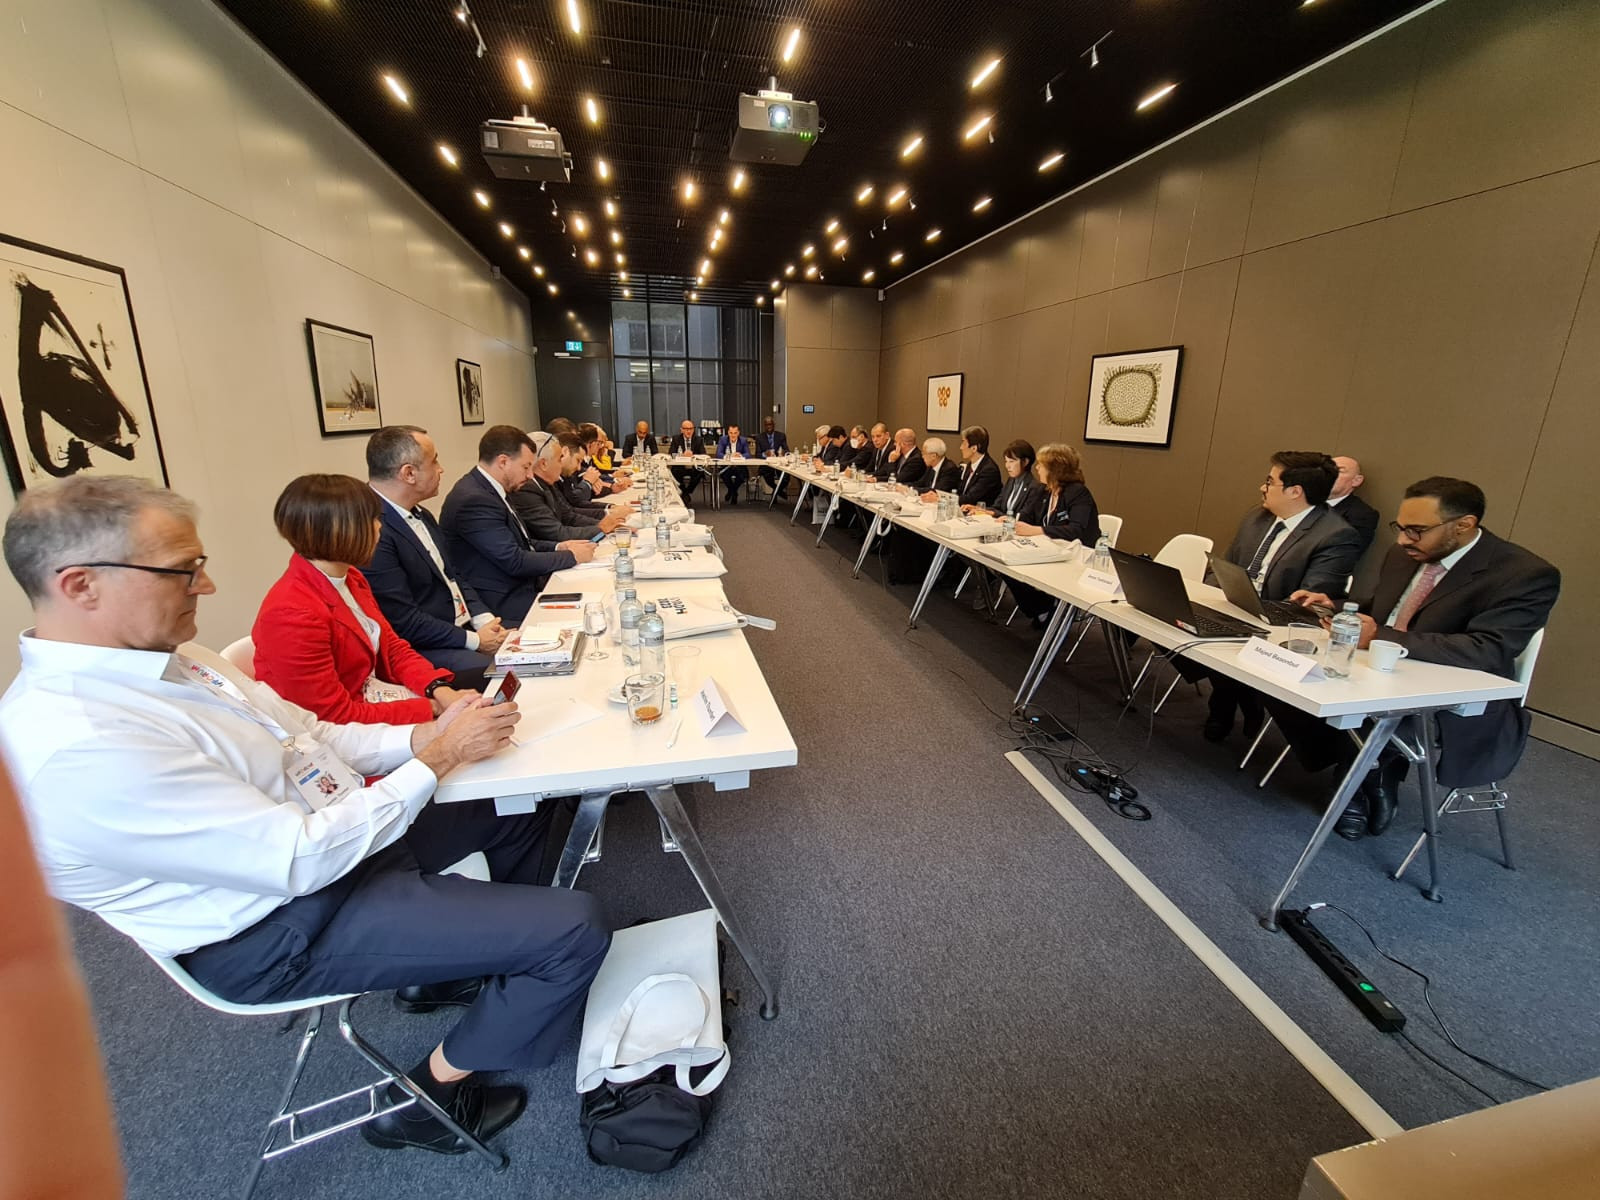 Representatives from all 15 International Federations involved in next year's World Combat Games participated in a meeting at the Olympic Museum ©SportAccord